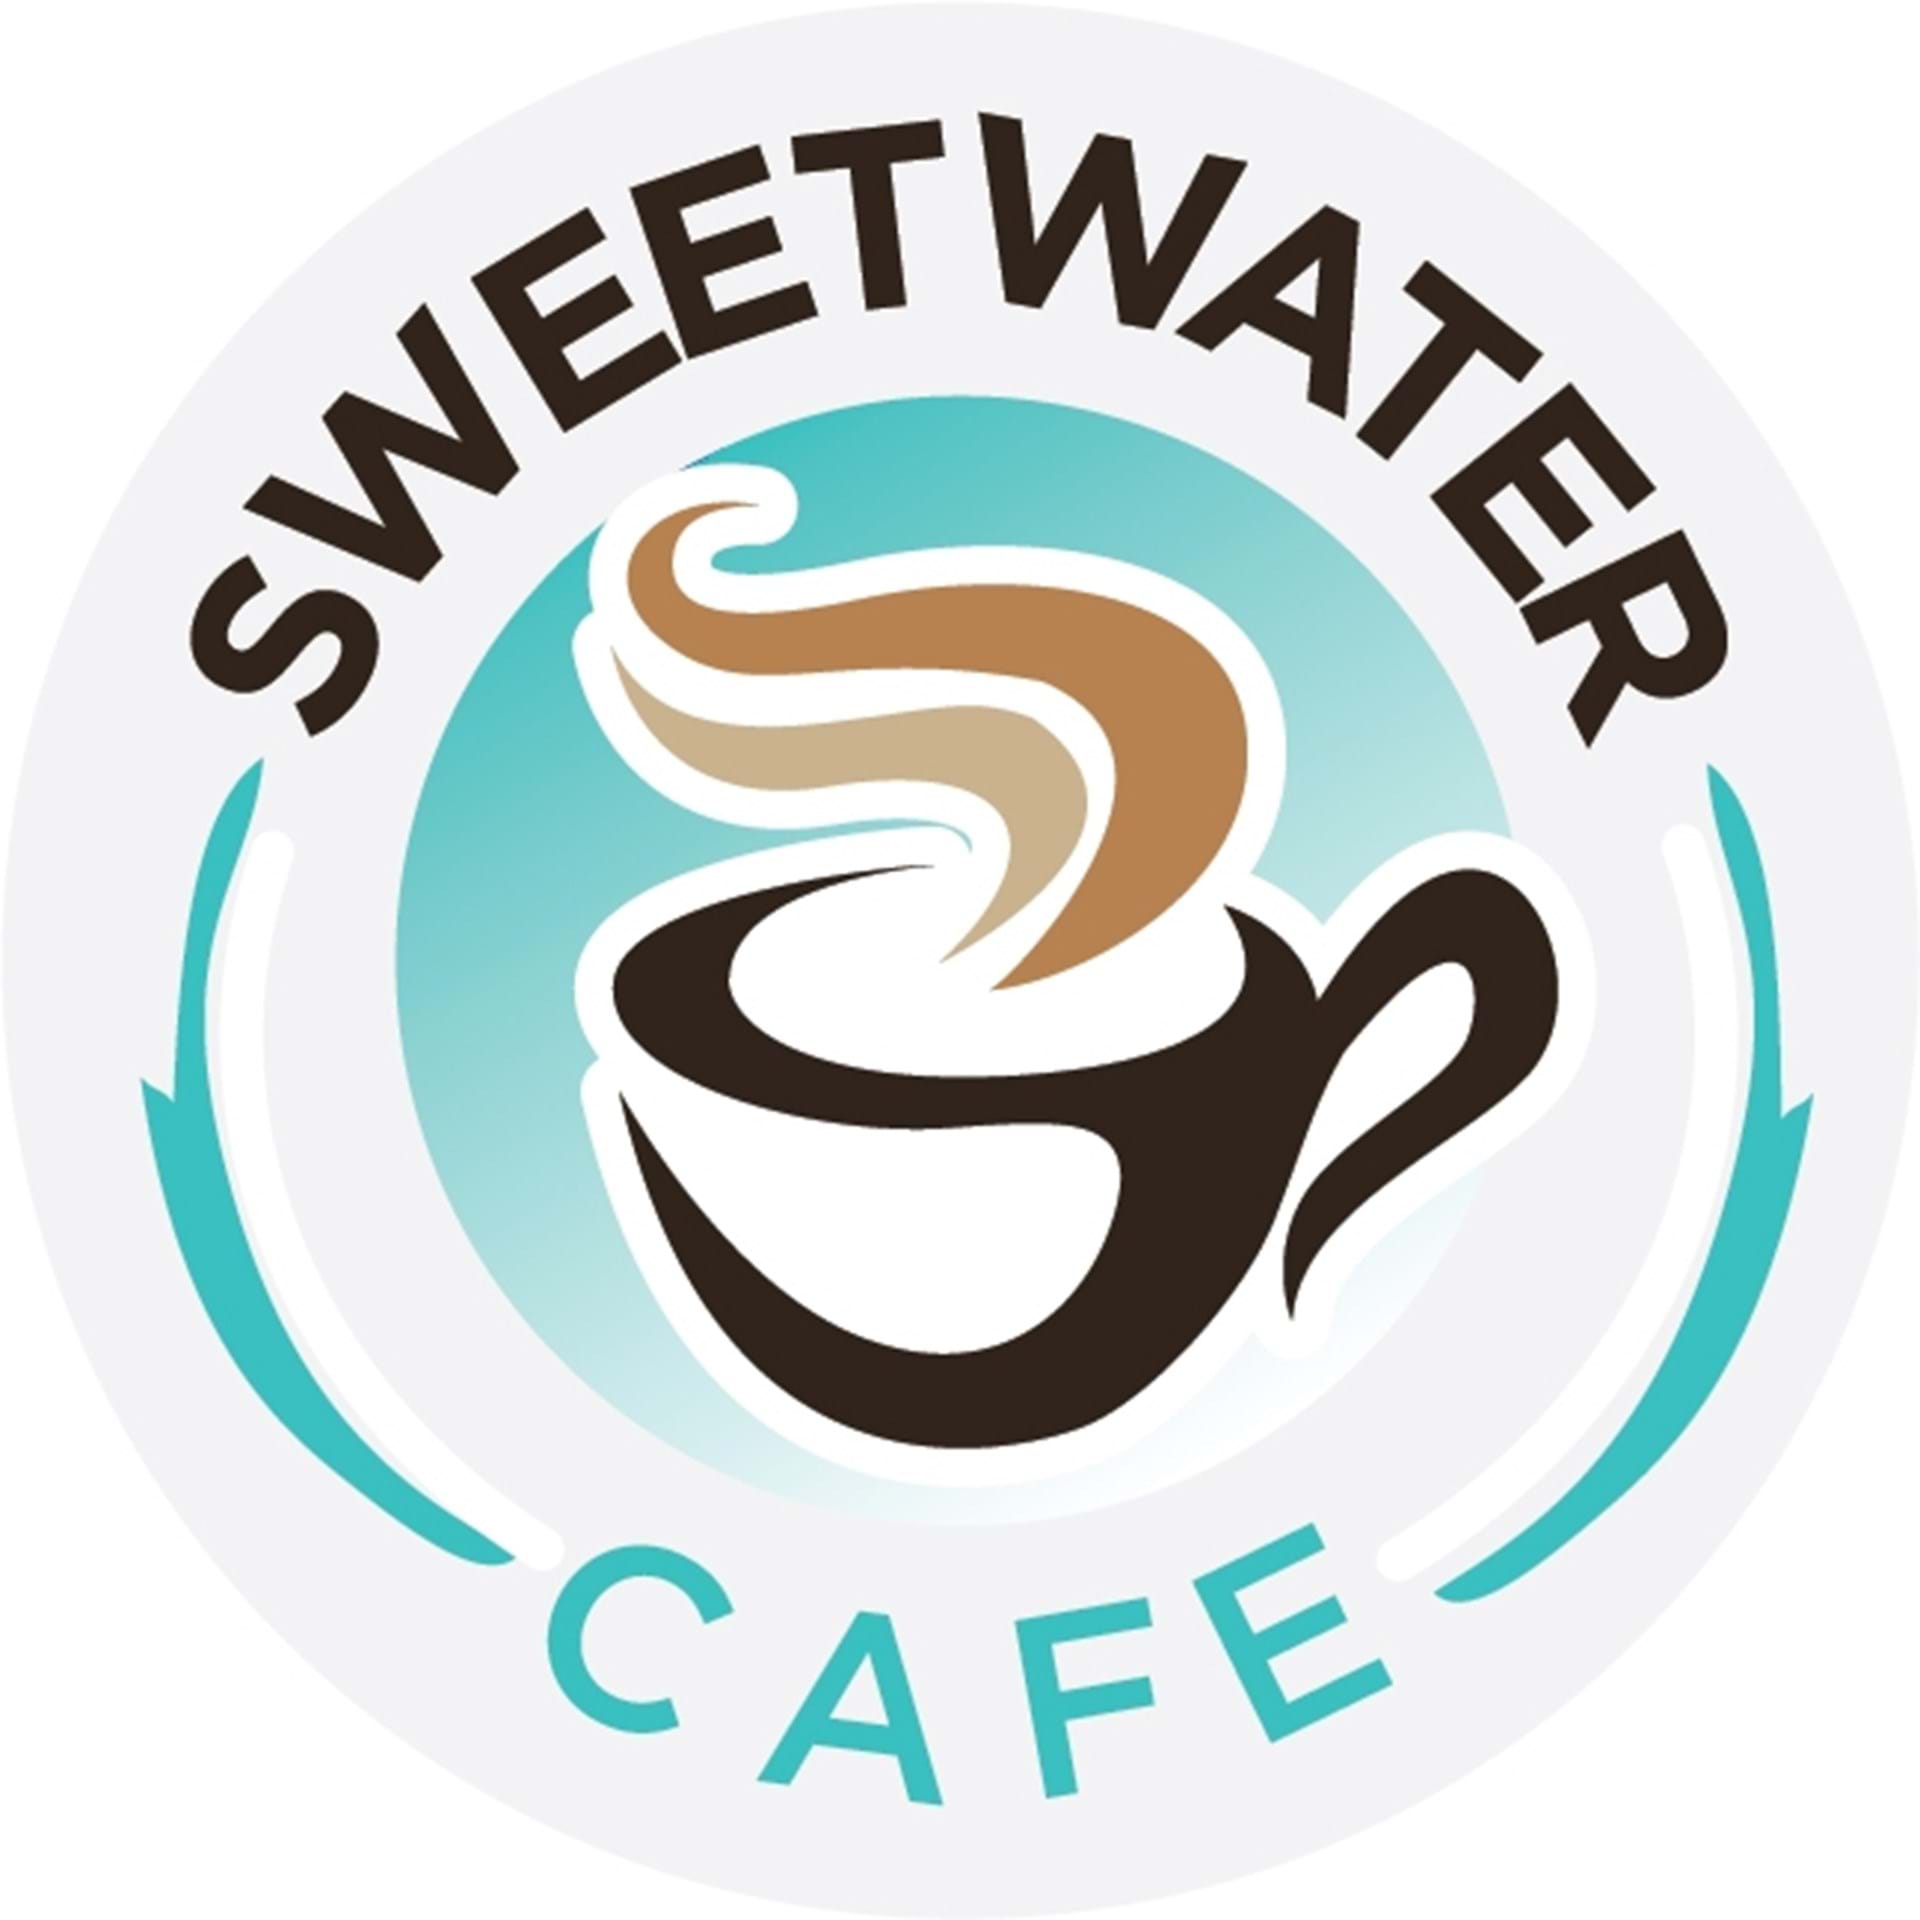 Sweetwater Cafe